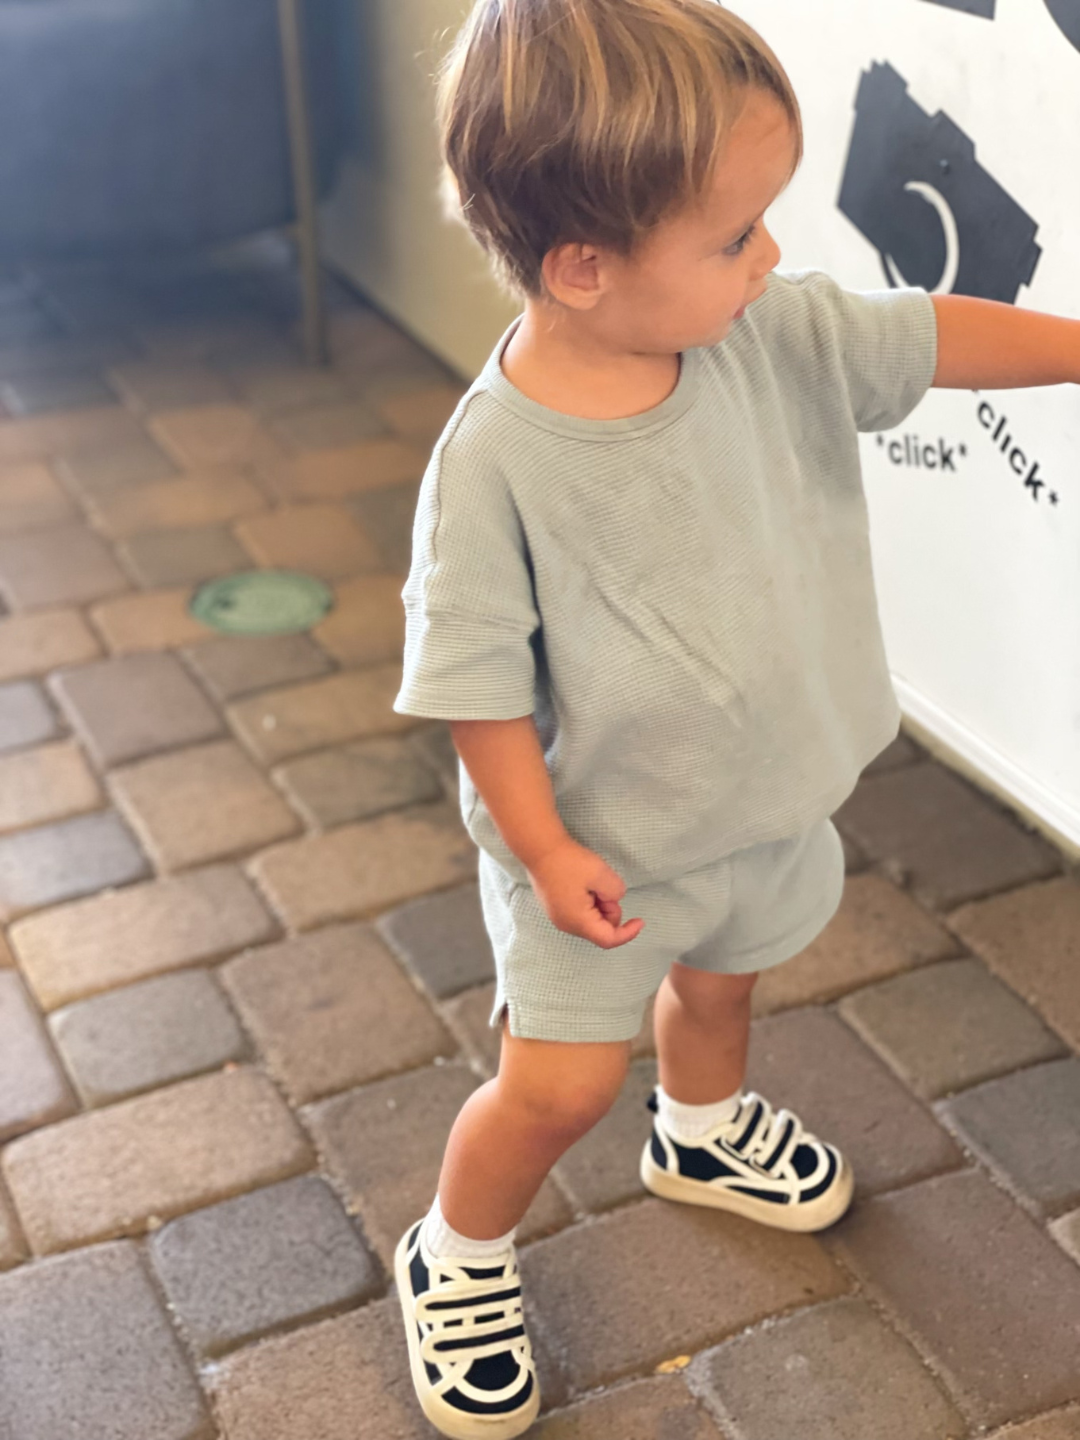 Black | Child wearing the Black Bounce House Sneakers